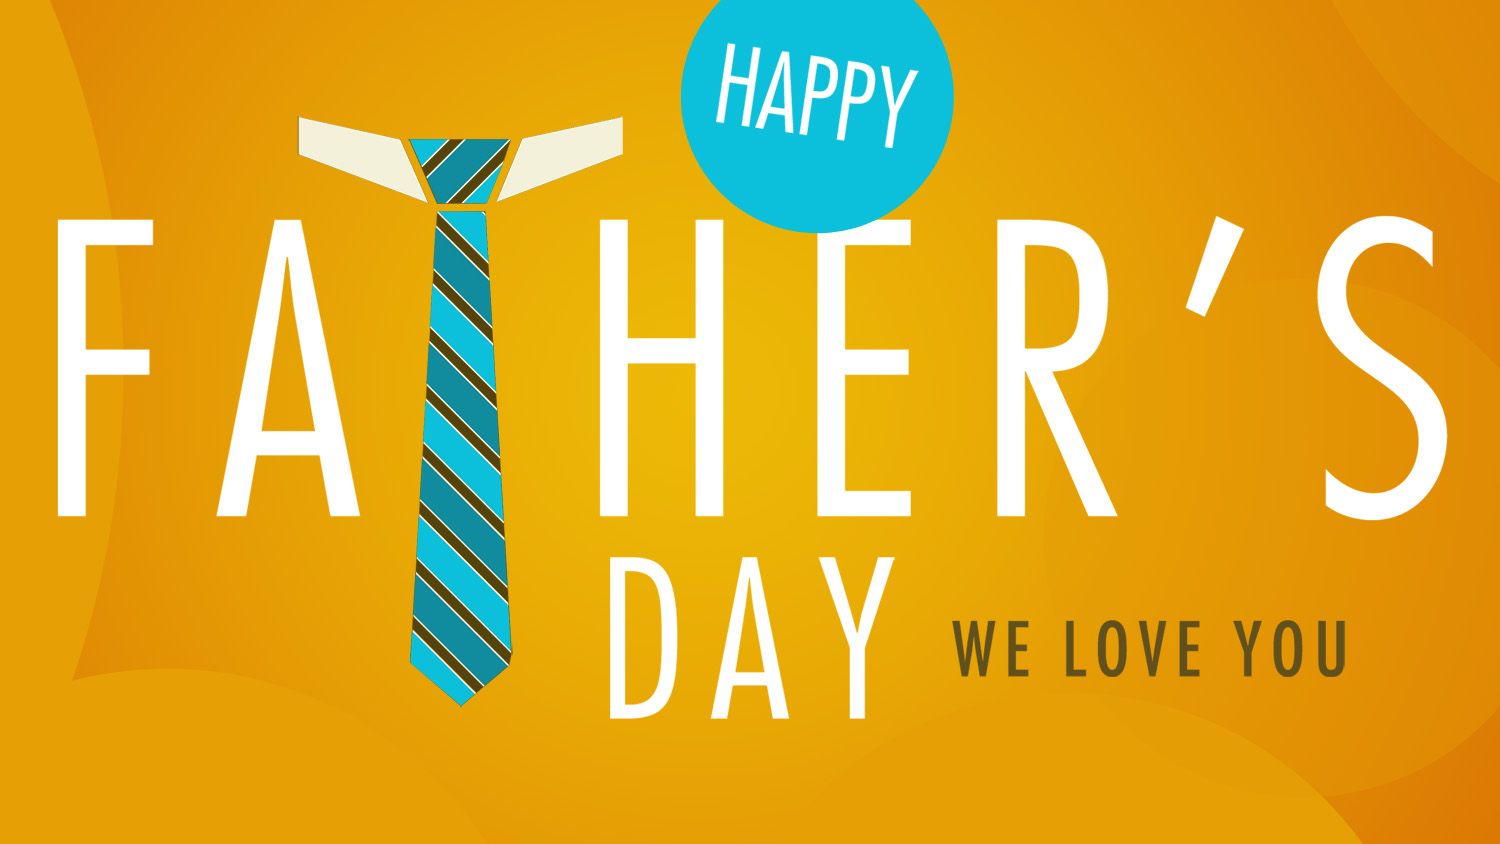 fathers day images hd download